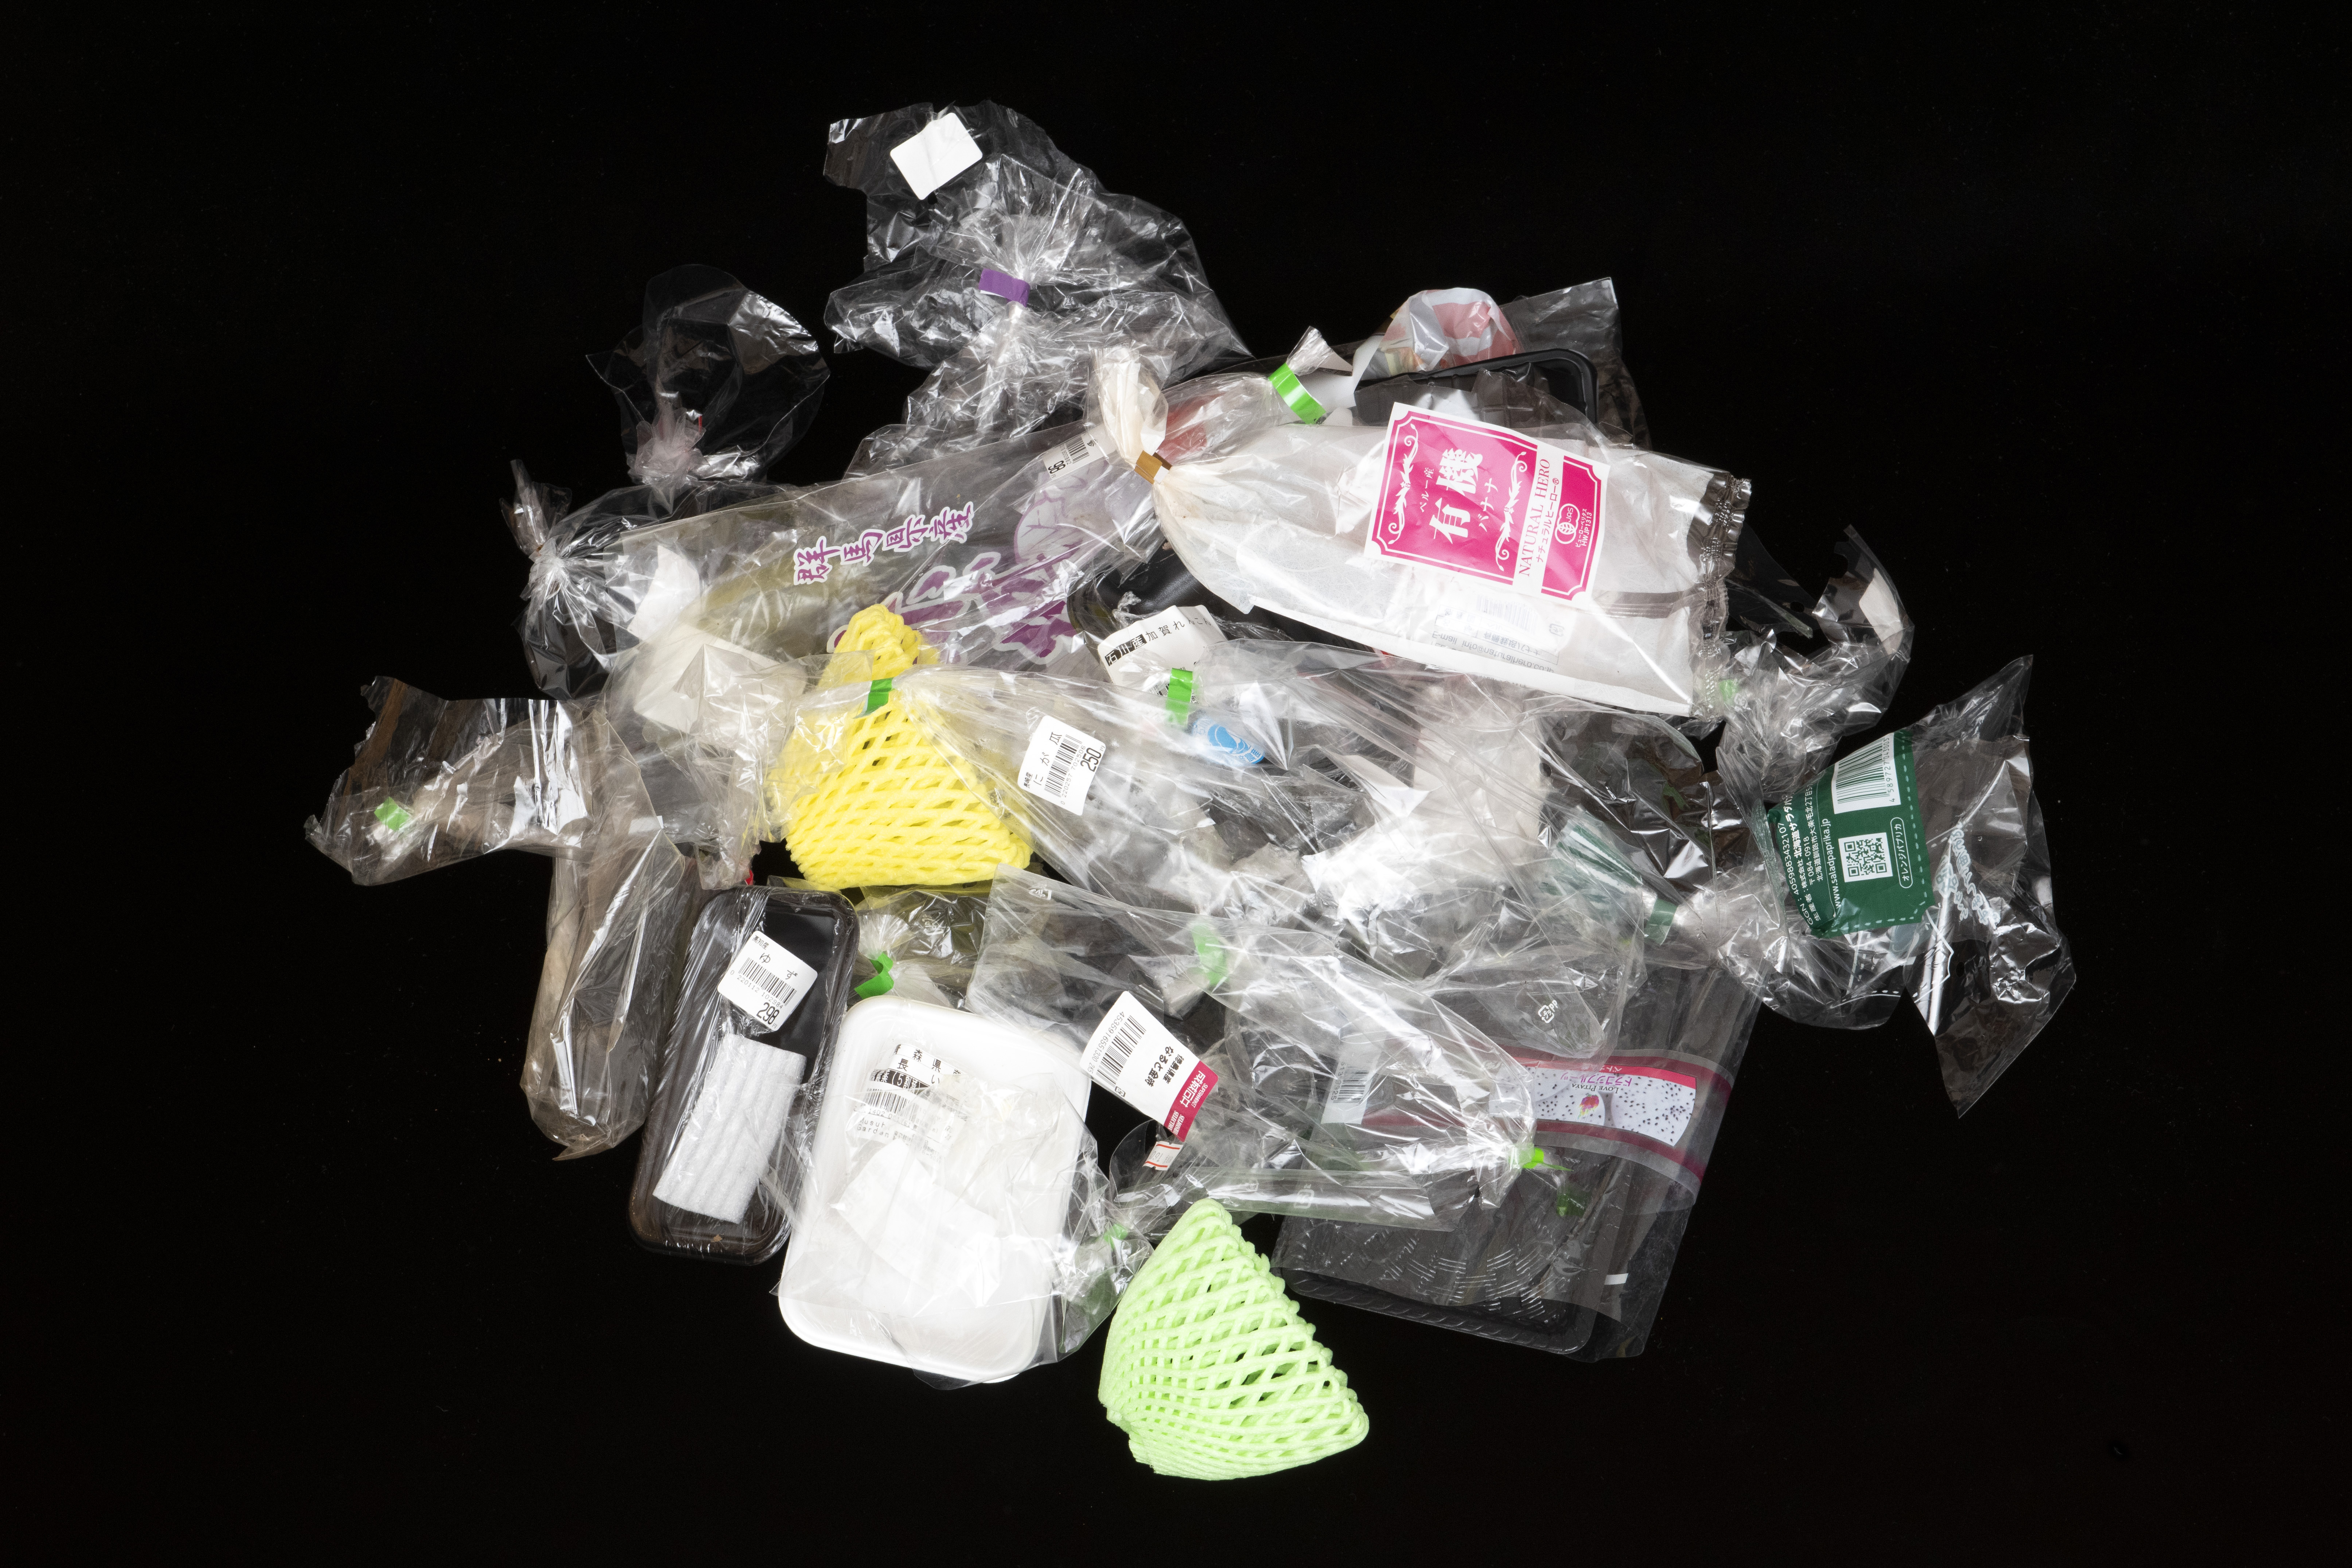 Single Use Plastic Bag Ban Creates Unintended Problems in Canada  [Feature/Expert Interviews]